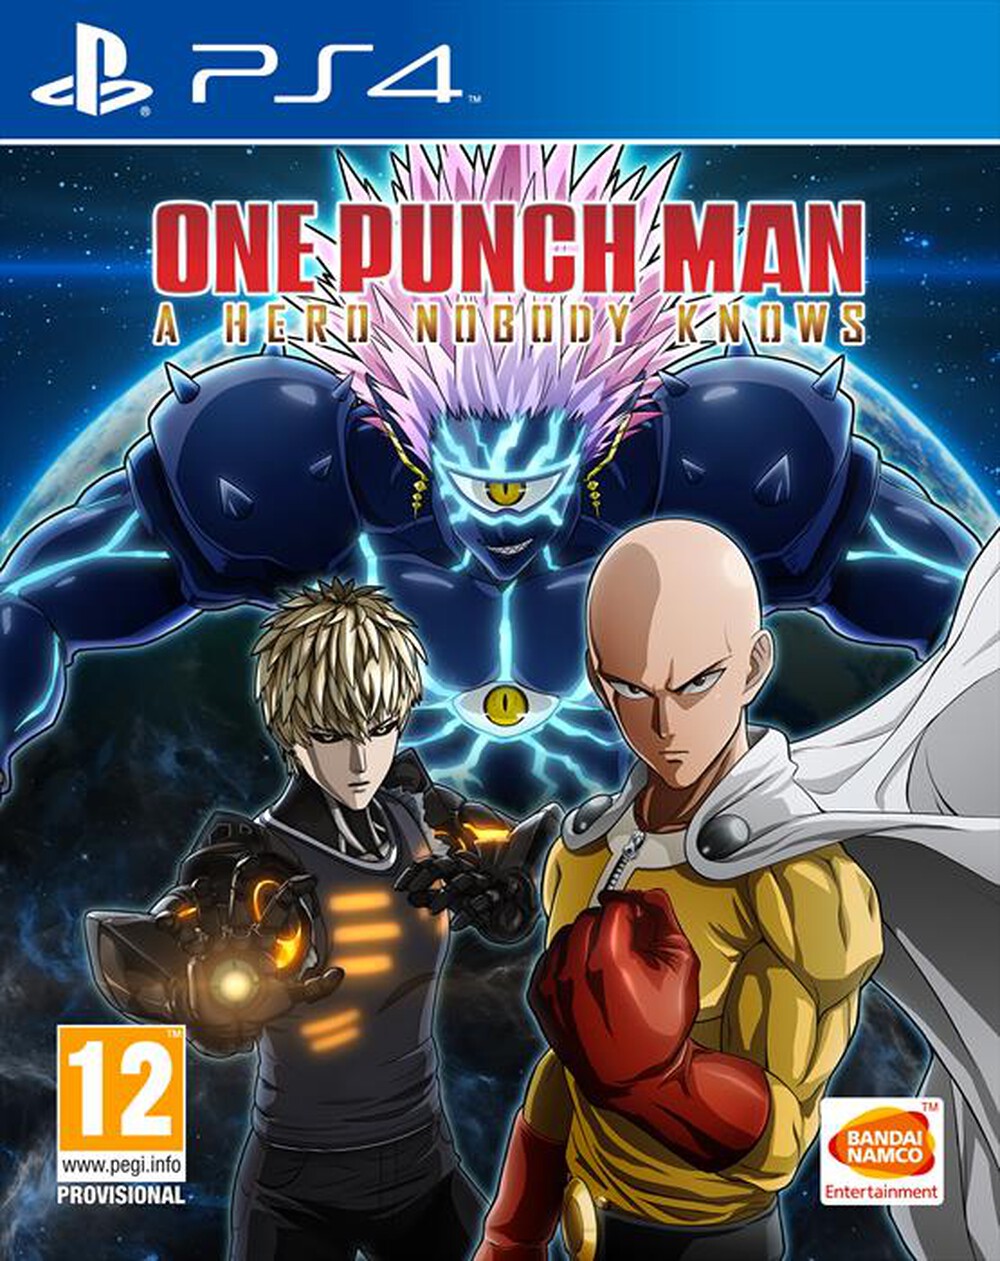 "NAMCO - ONE PUNCH MAN: A HERO NOBODY KNOWS  PS4"